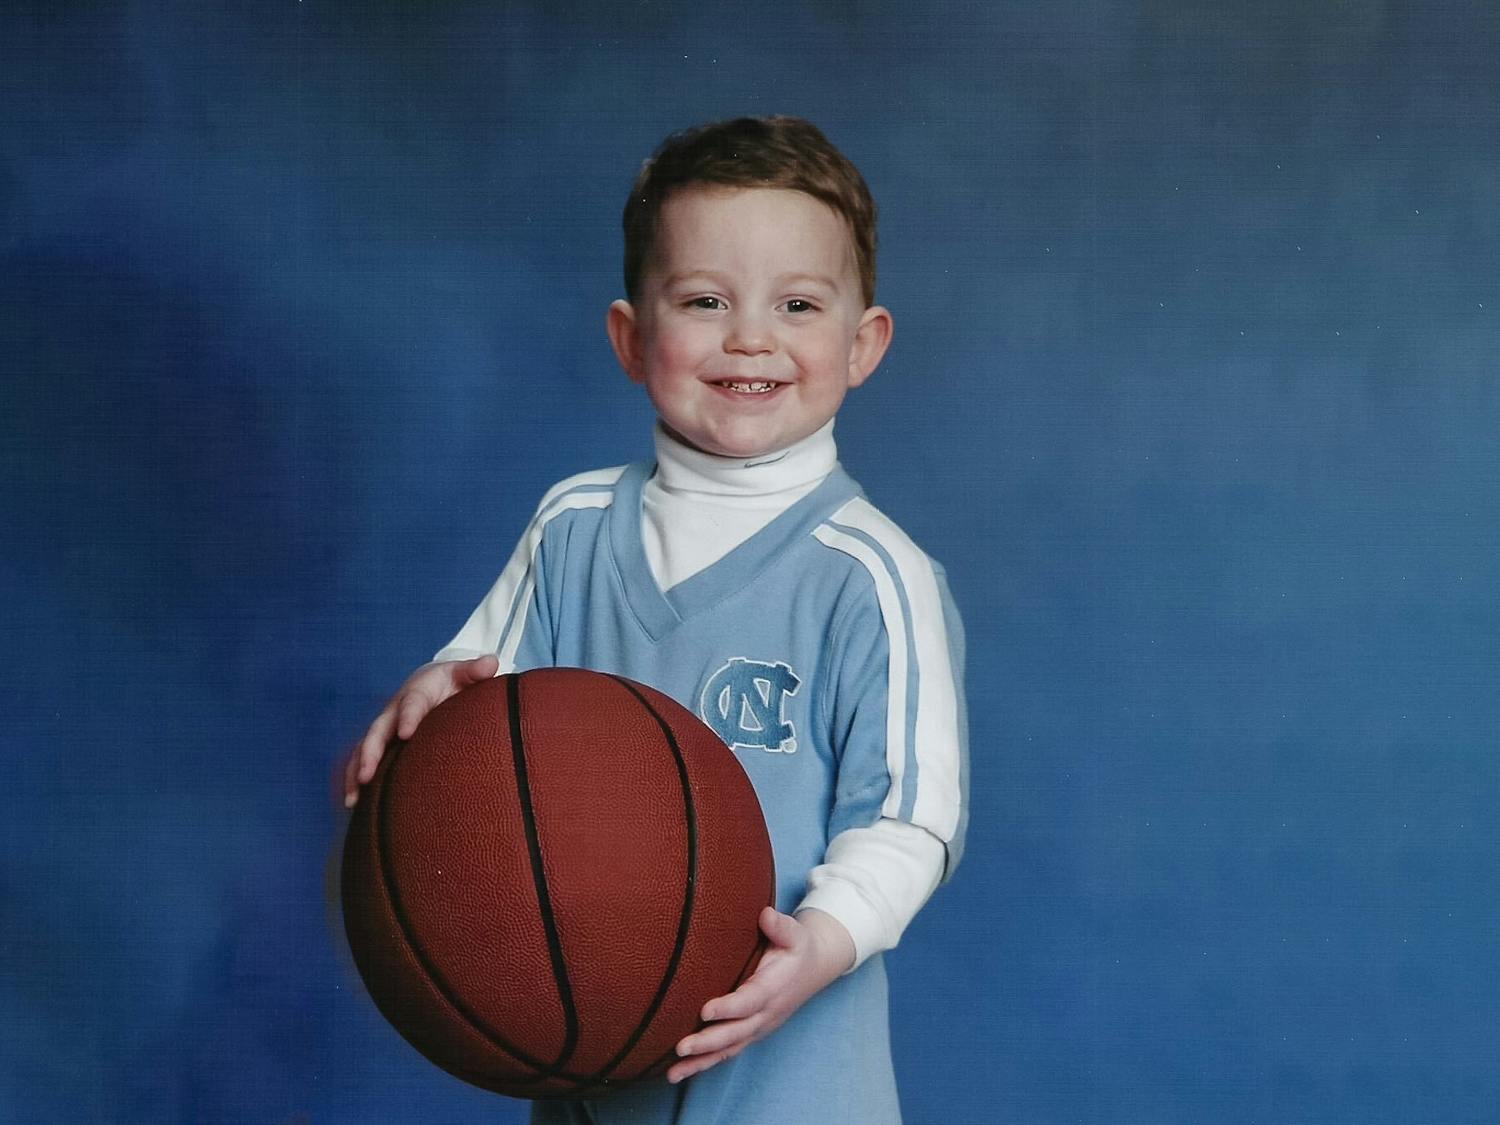 A young Ethan E. Horton poses in his UNC gear during a photo shoot in 2004.
Photo Courtesy of Marion Horton.